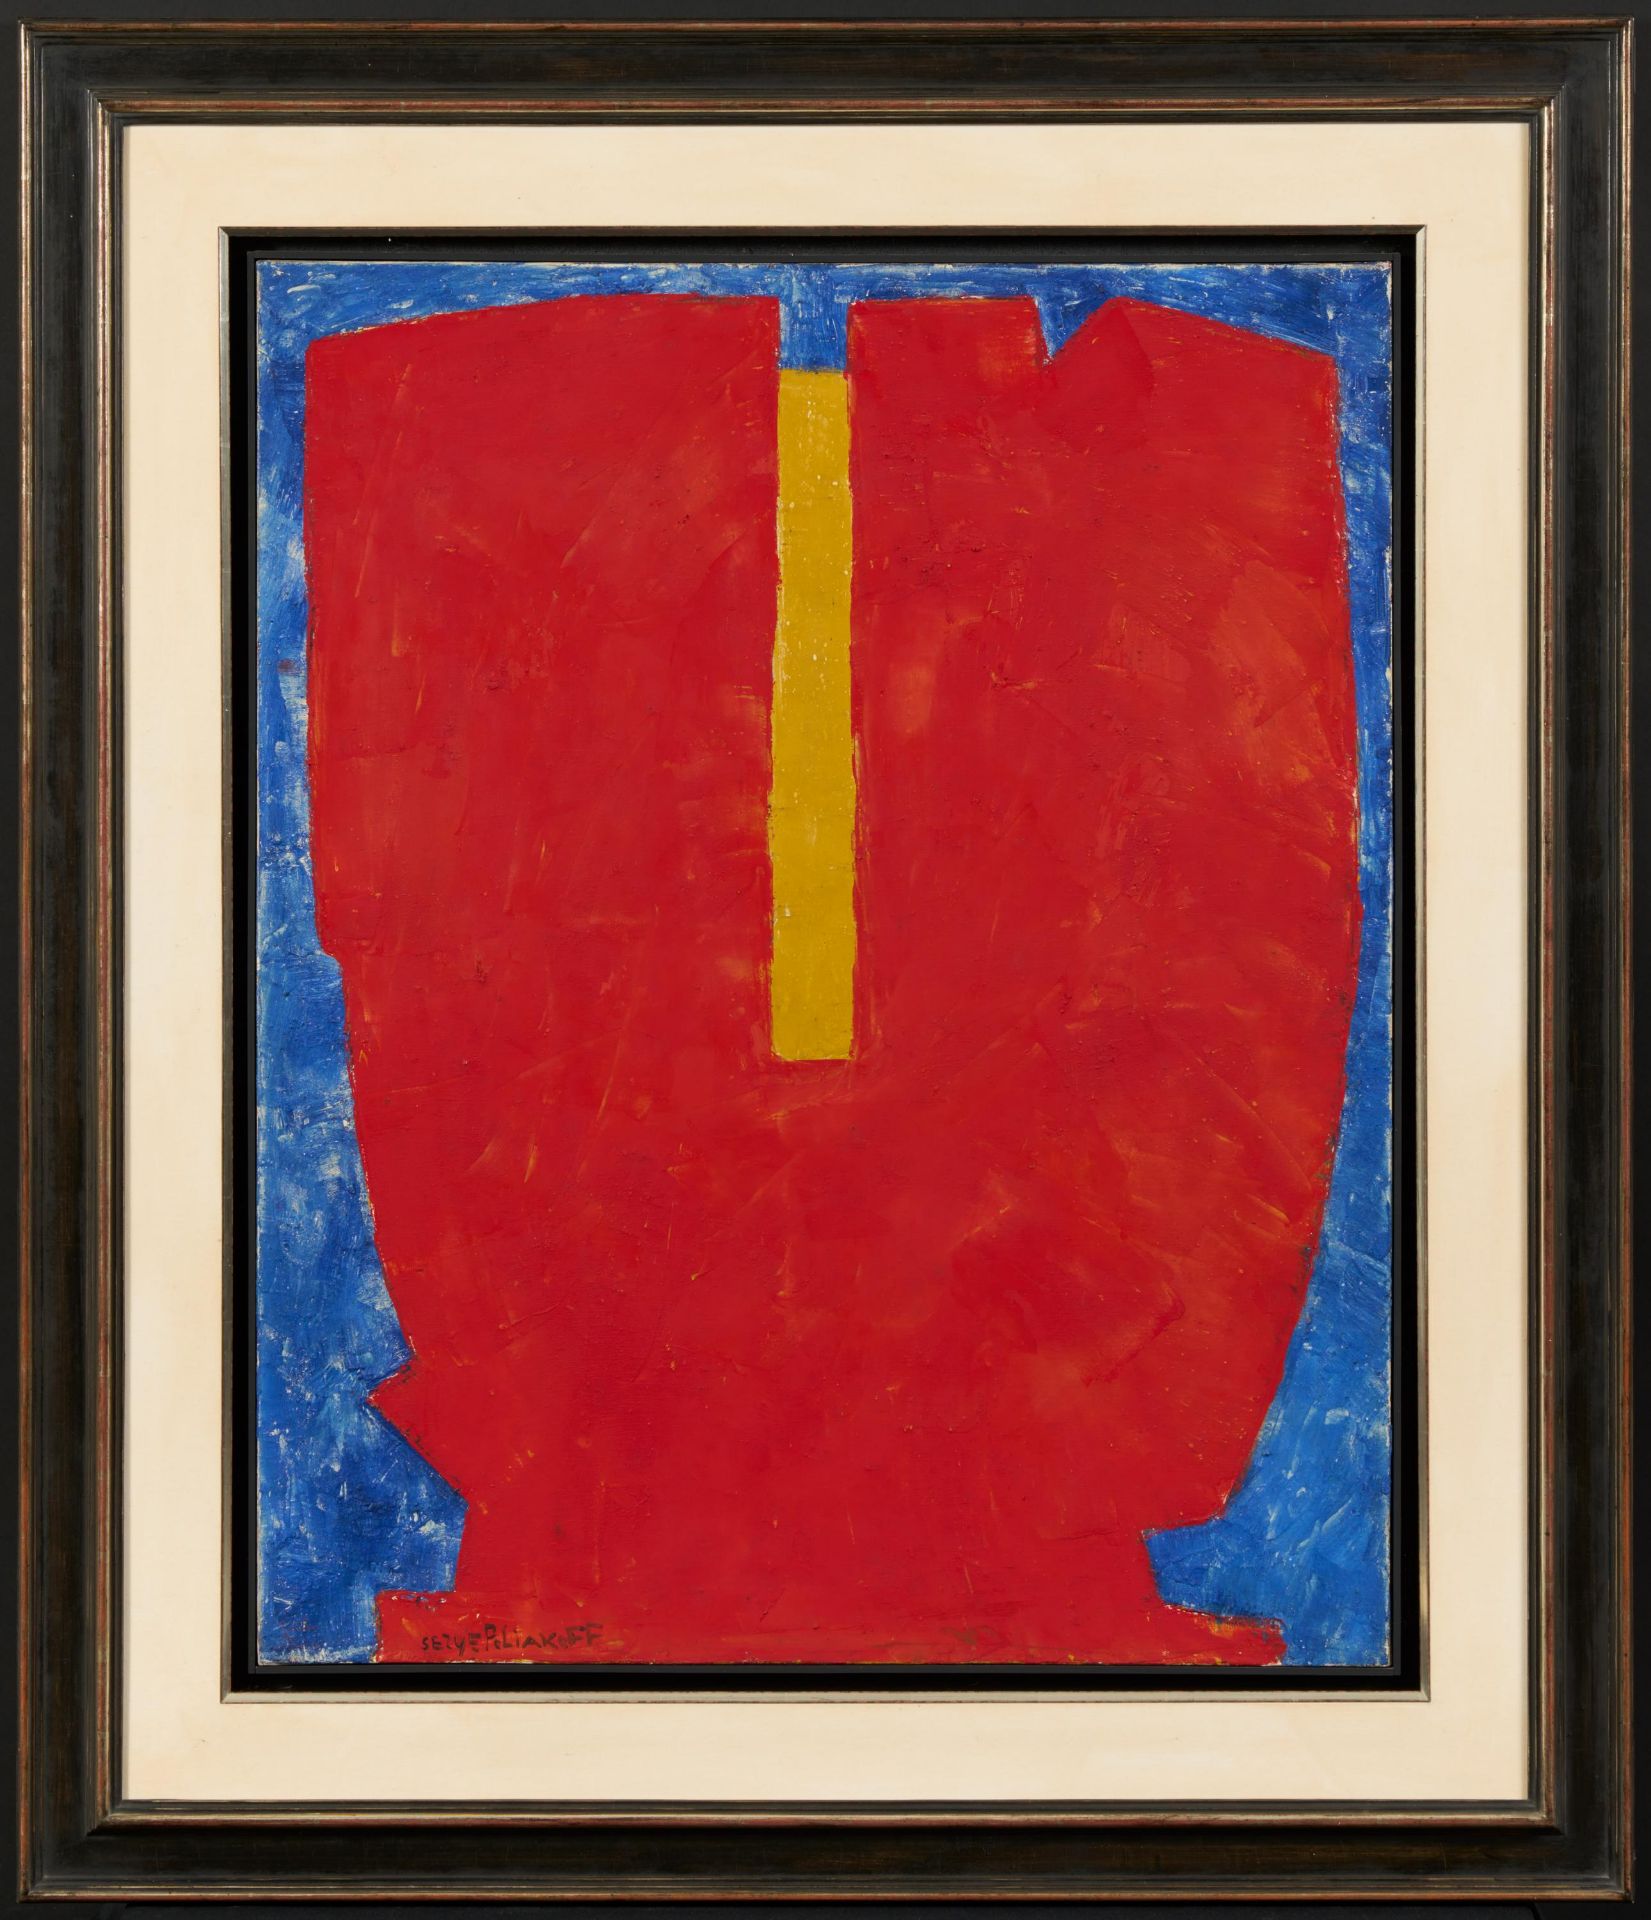 Serge Poliakoff: Composition abstraite - Image 2 of 4